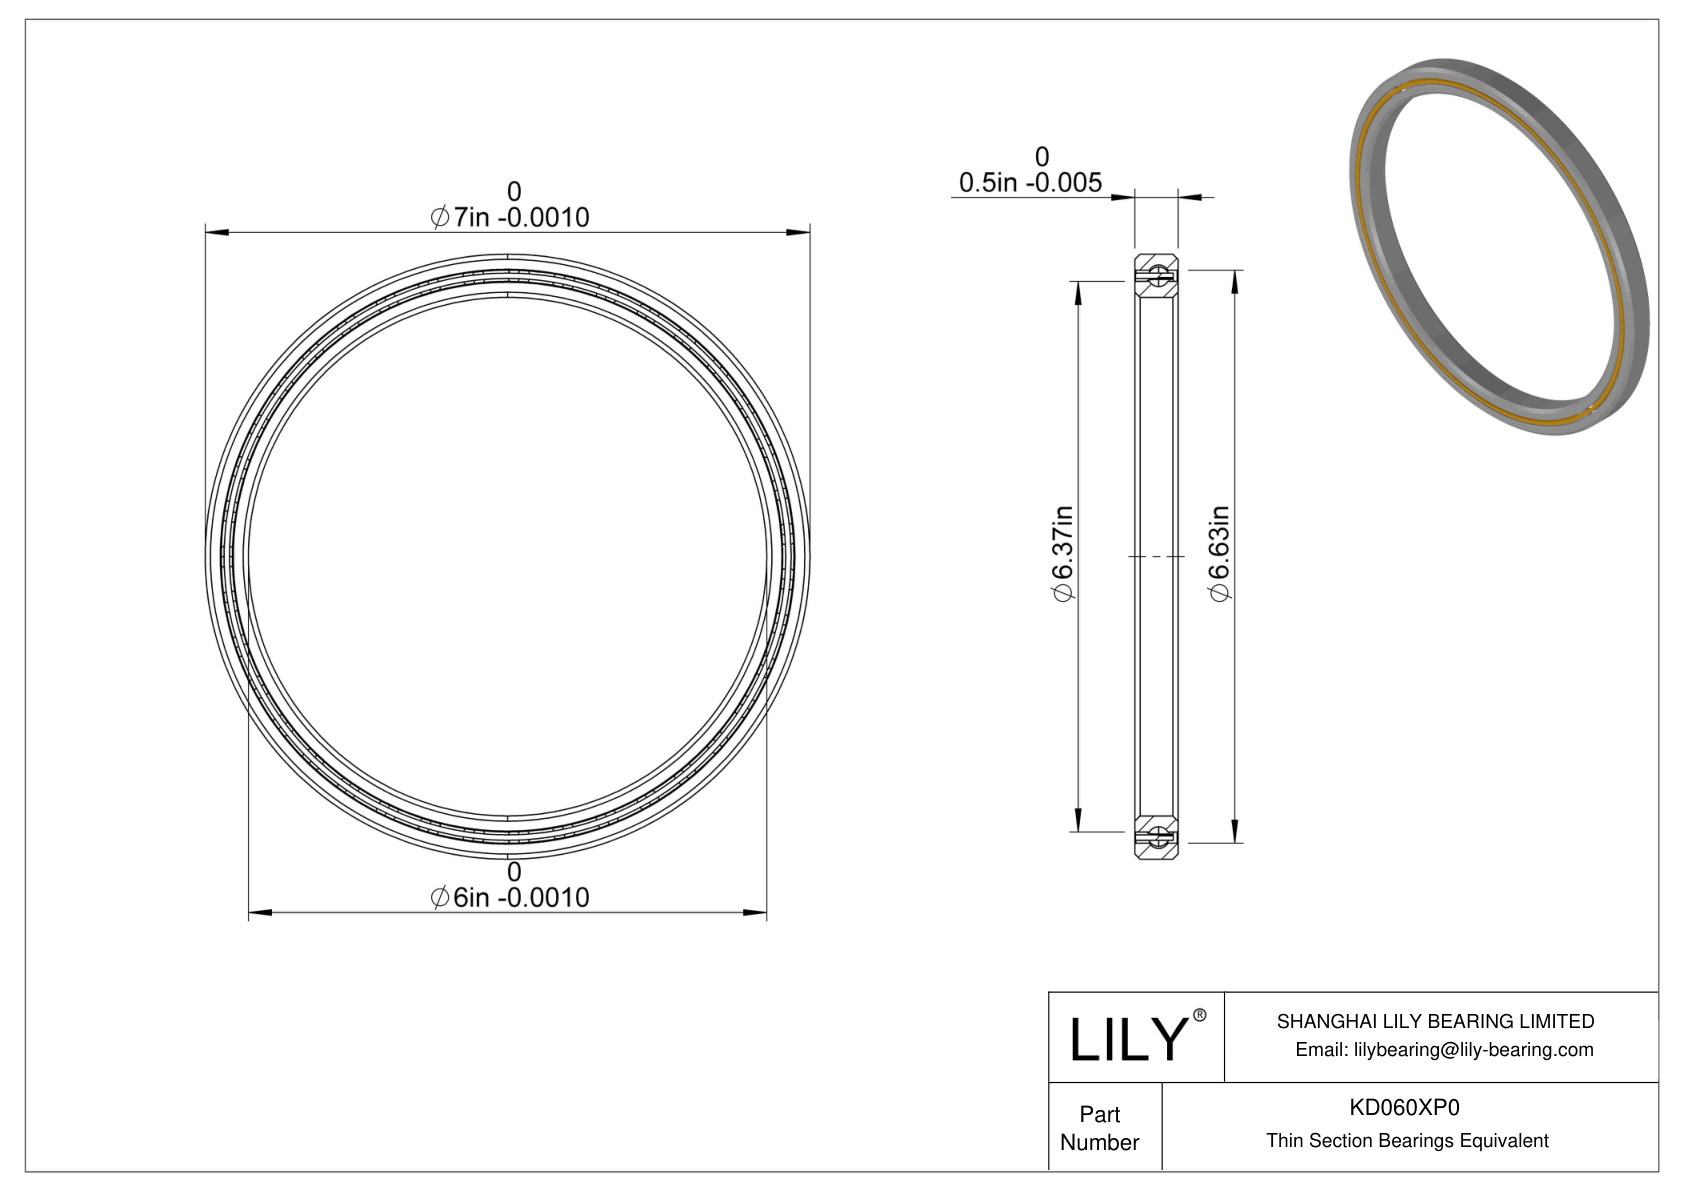 KD060XP0 Constant Section (CS) Bearings cad drawing